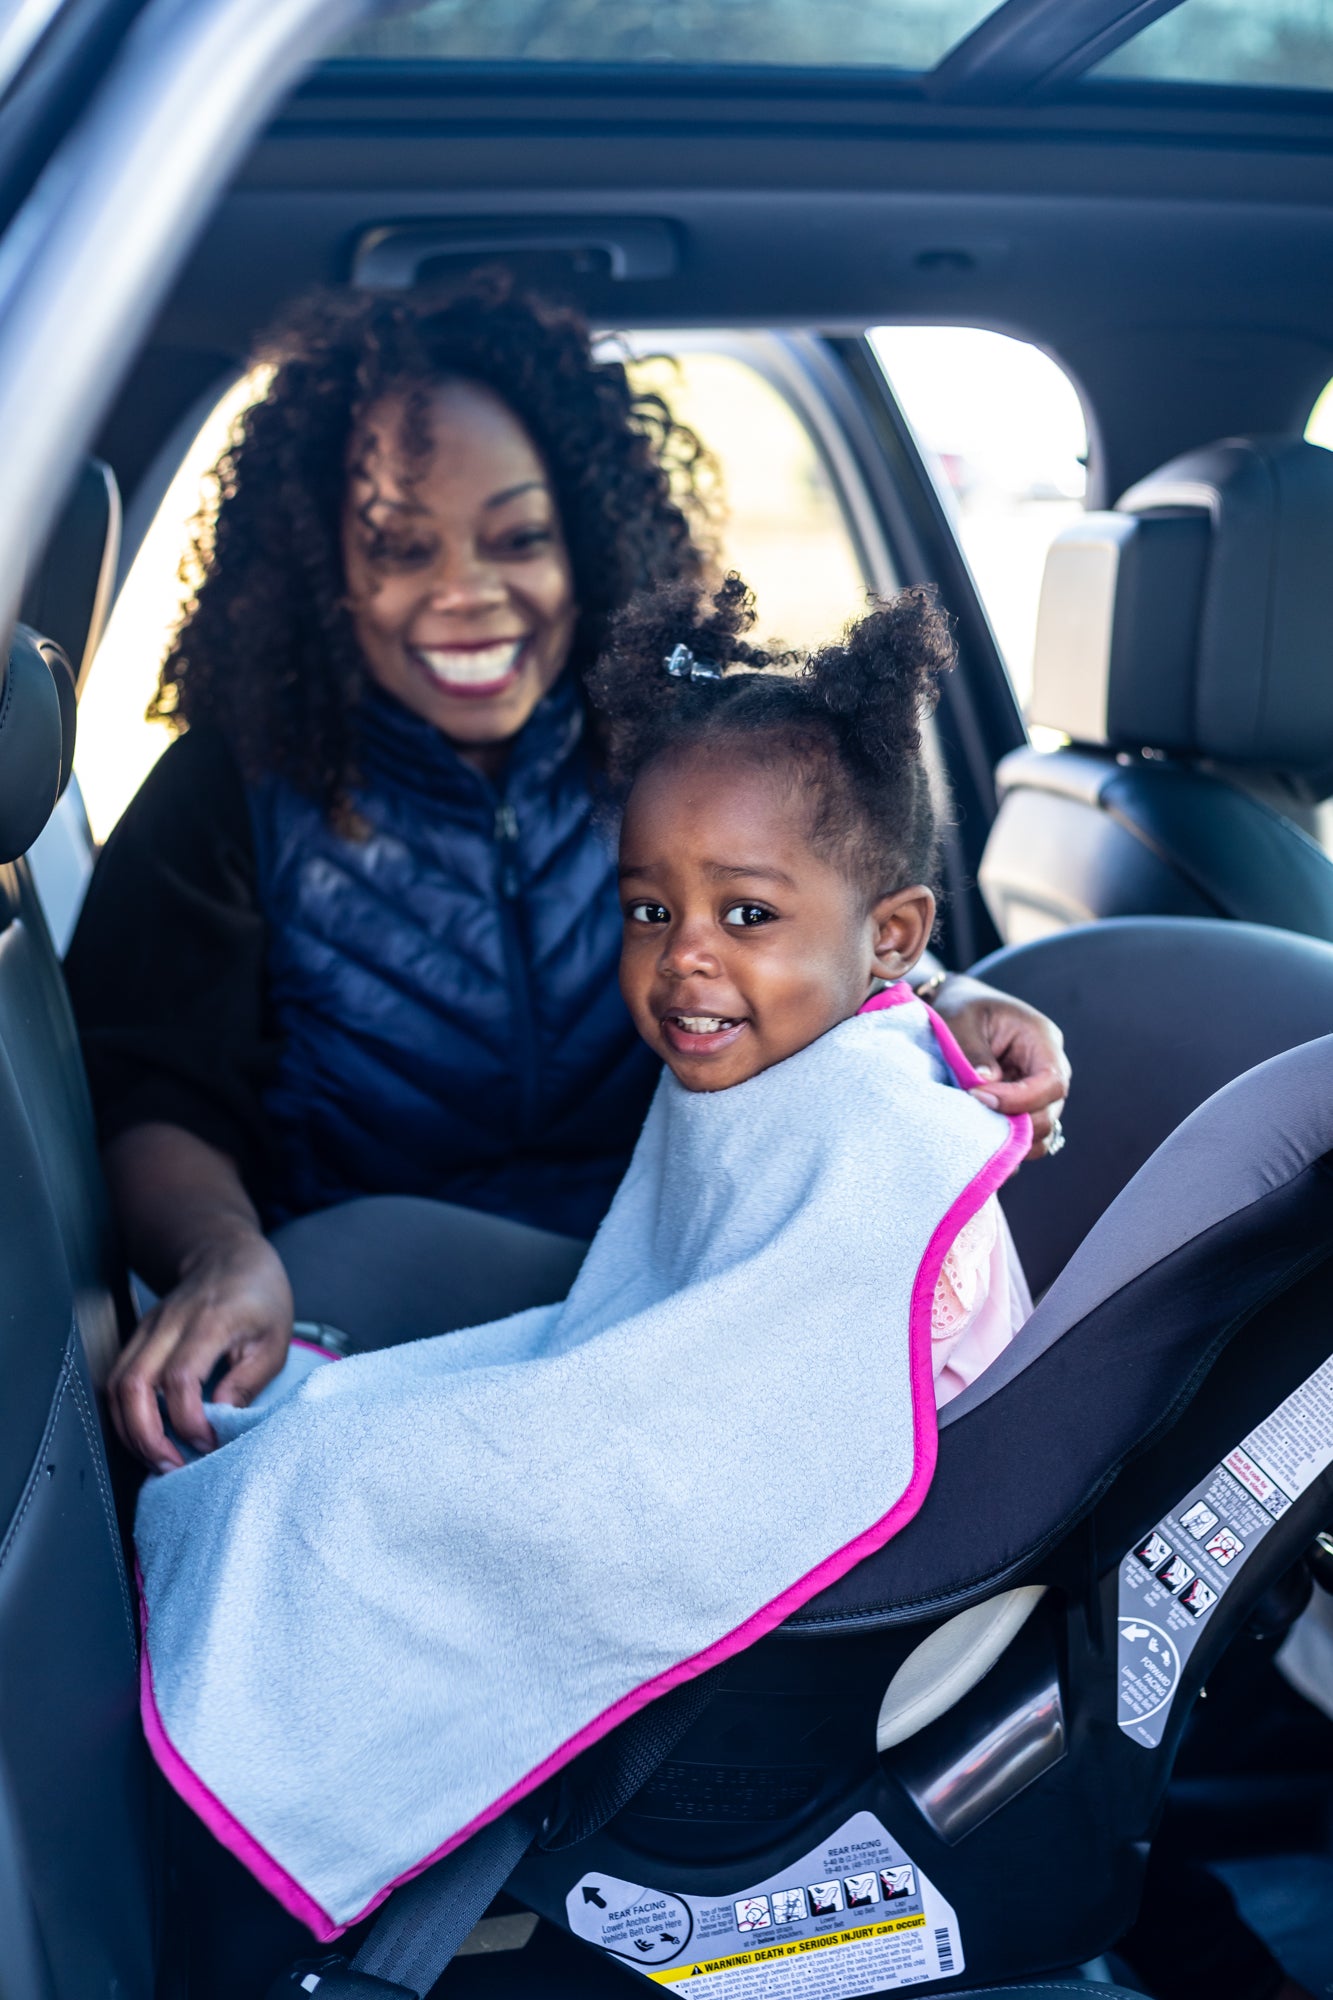 Car Seat Bib is the first-ever bib designed specifically for kids to wear while in a car seat. It's safe, toxin-free, and easy to wash.